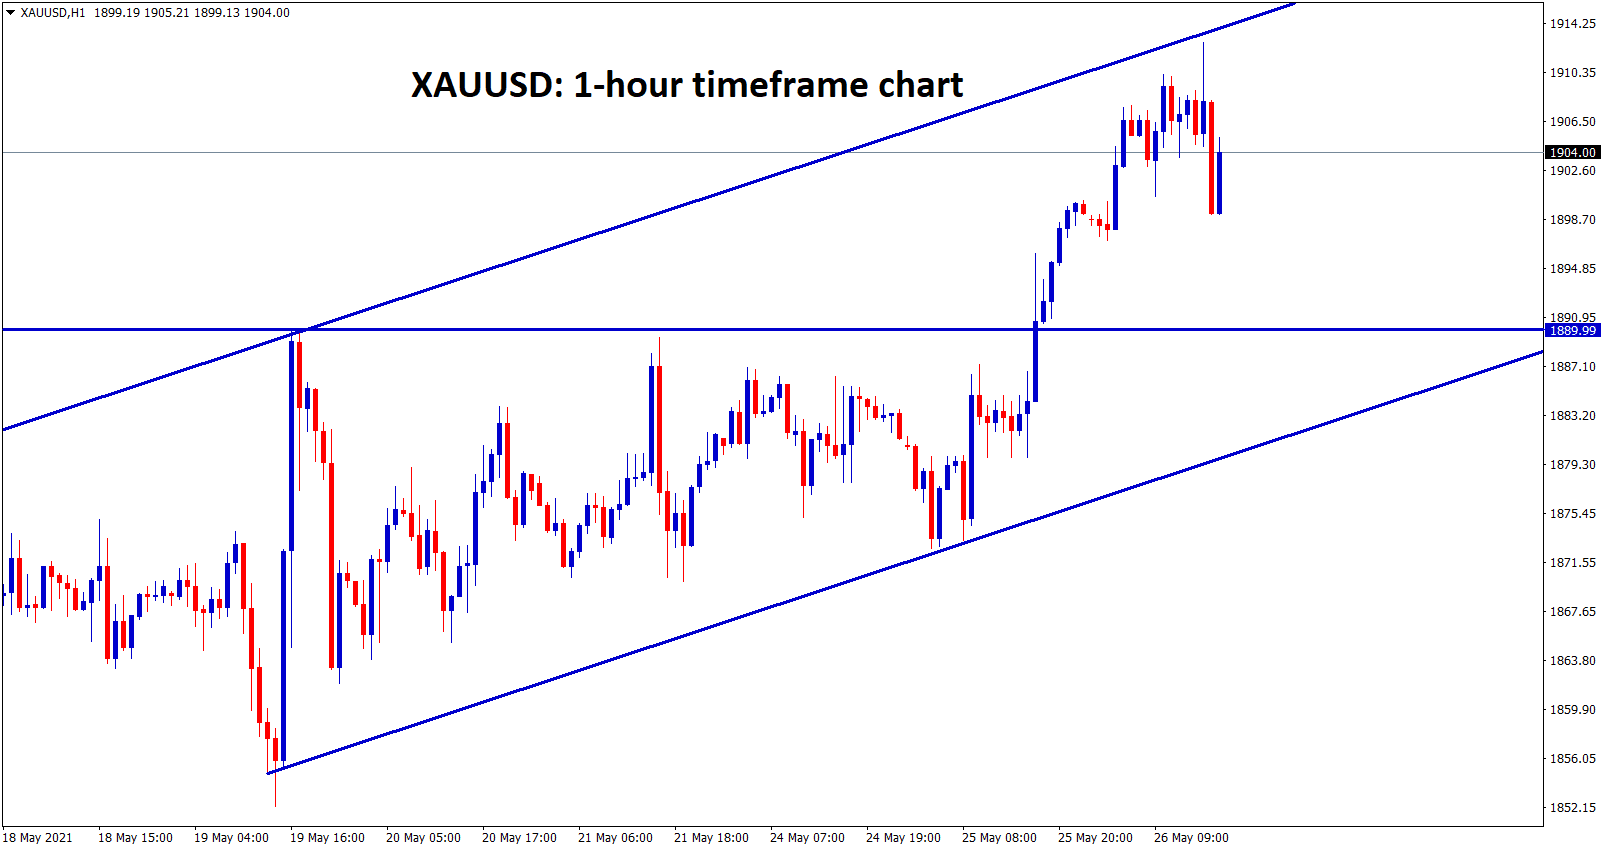 XAUUSD is moving in an Uptrend ascending channel